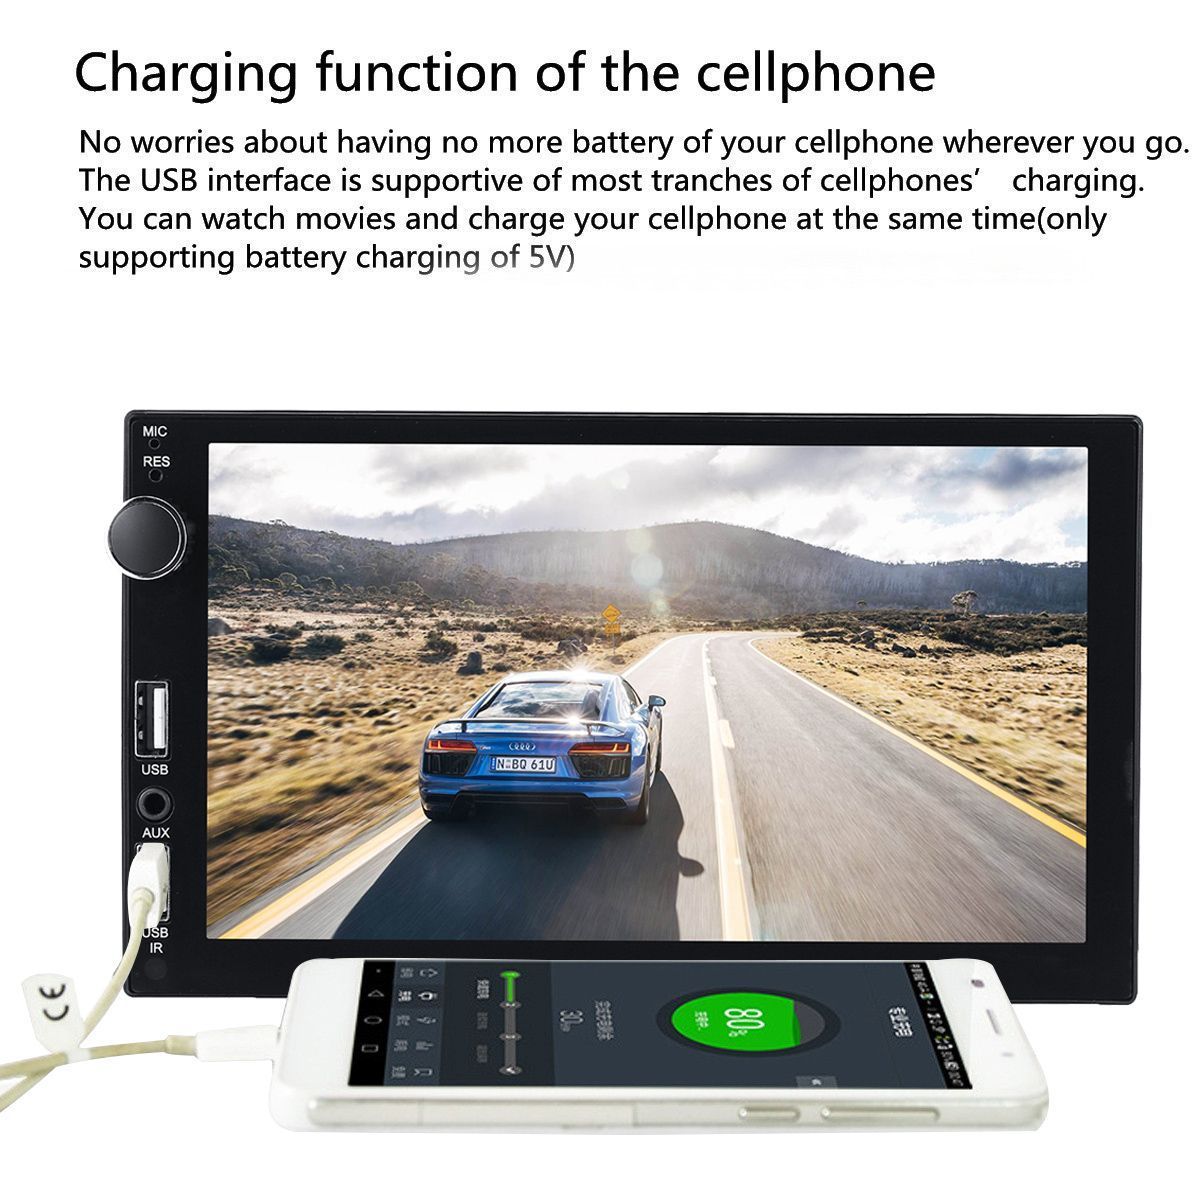 7-Inch-Double-Usb-Port-21A-Fast-Charge-Double-Spindle-Car-MP5-Player-Display-Reversing-Camera-1457606